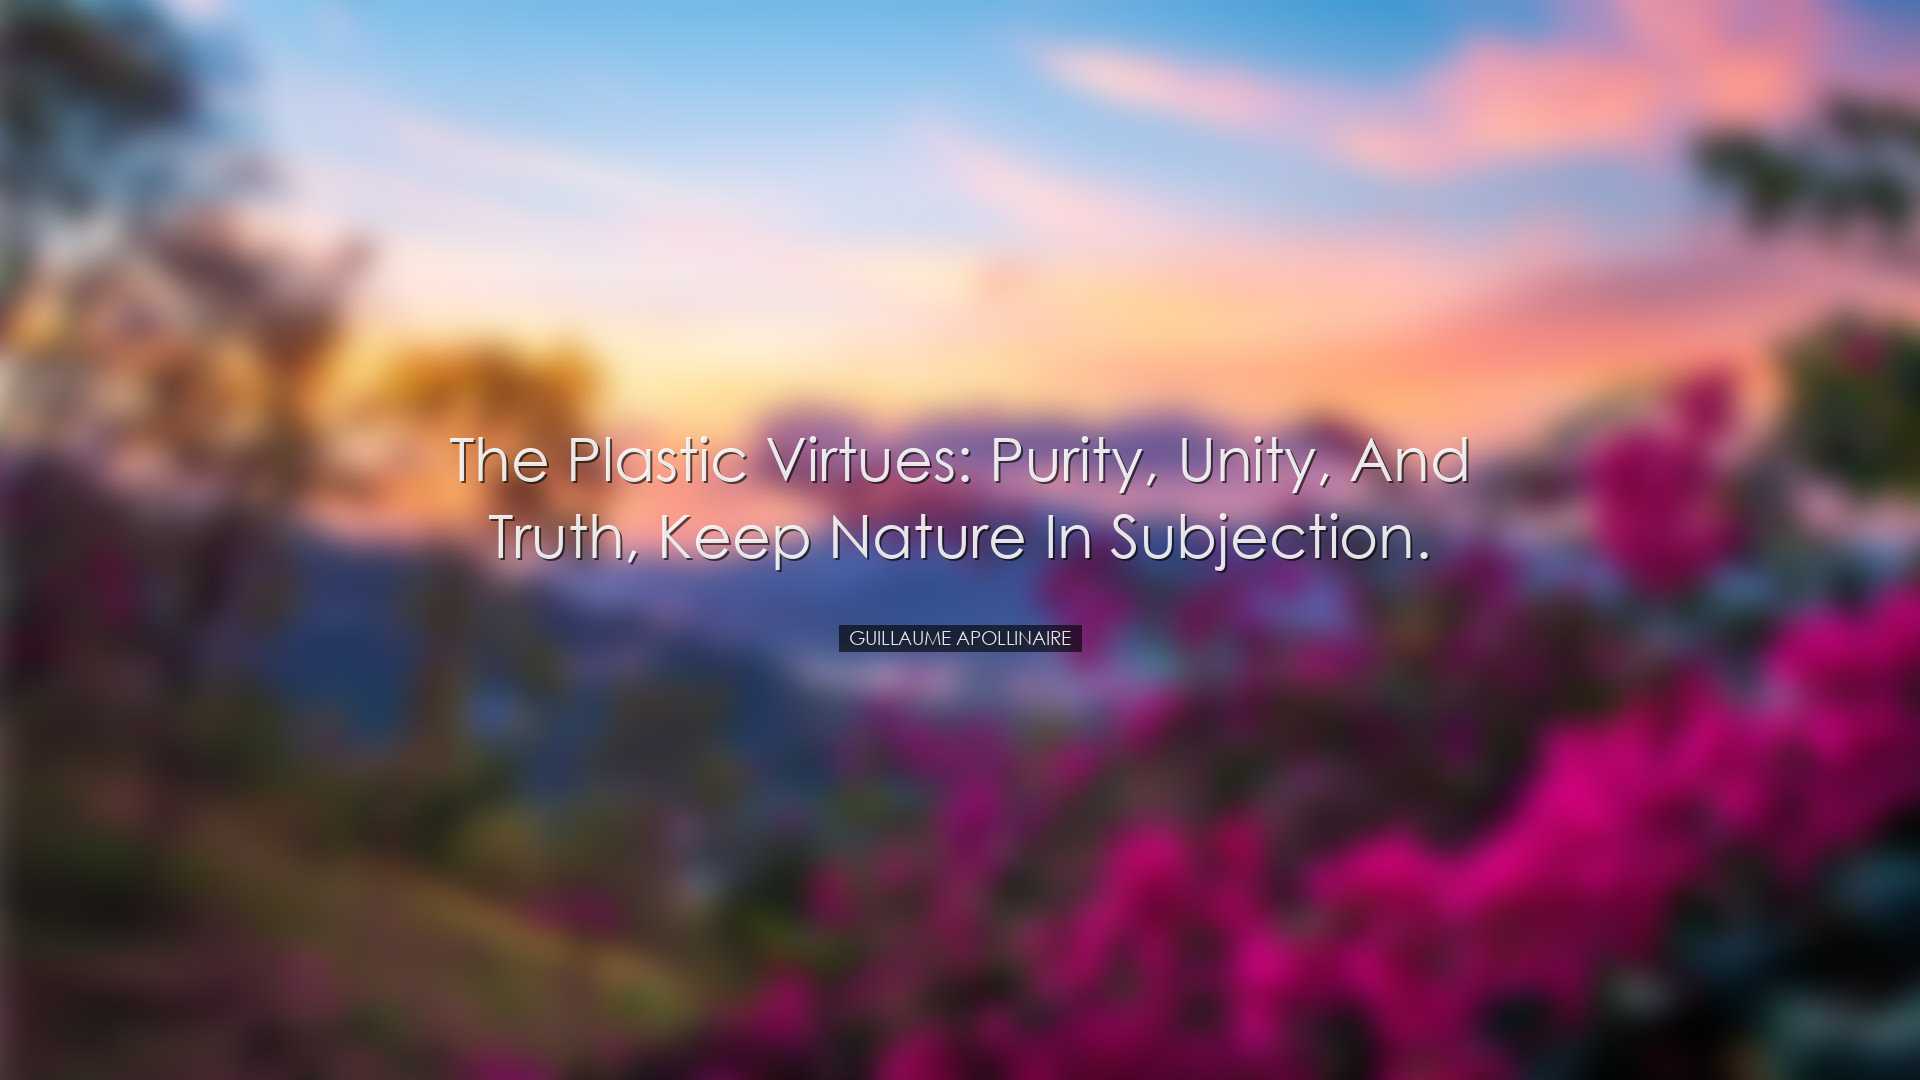 The plastic virtues: purity, unity, and truth, keep nature in subj